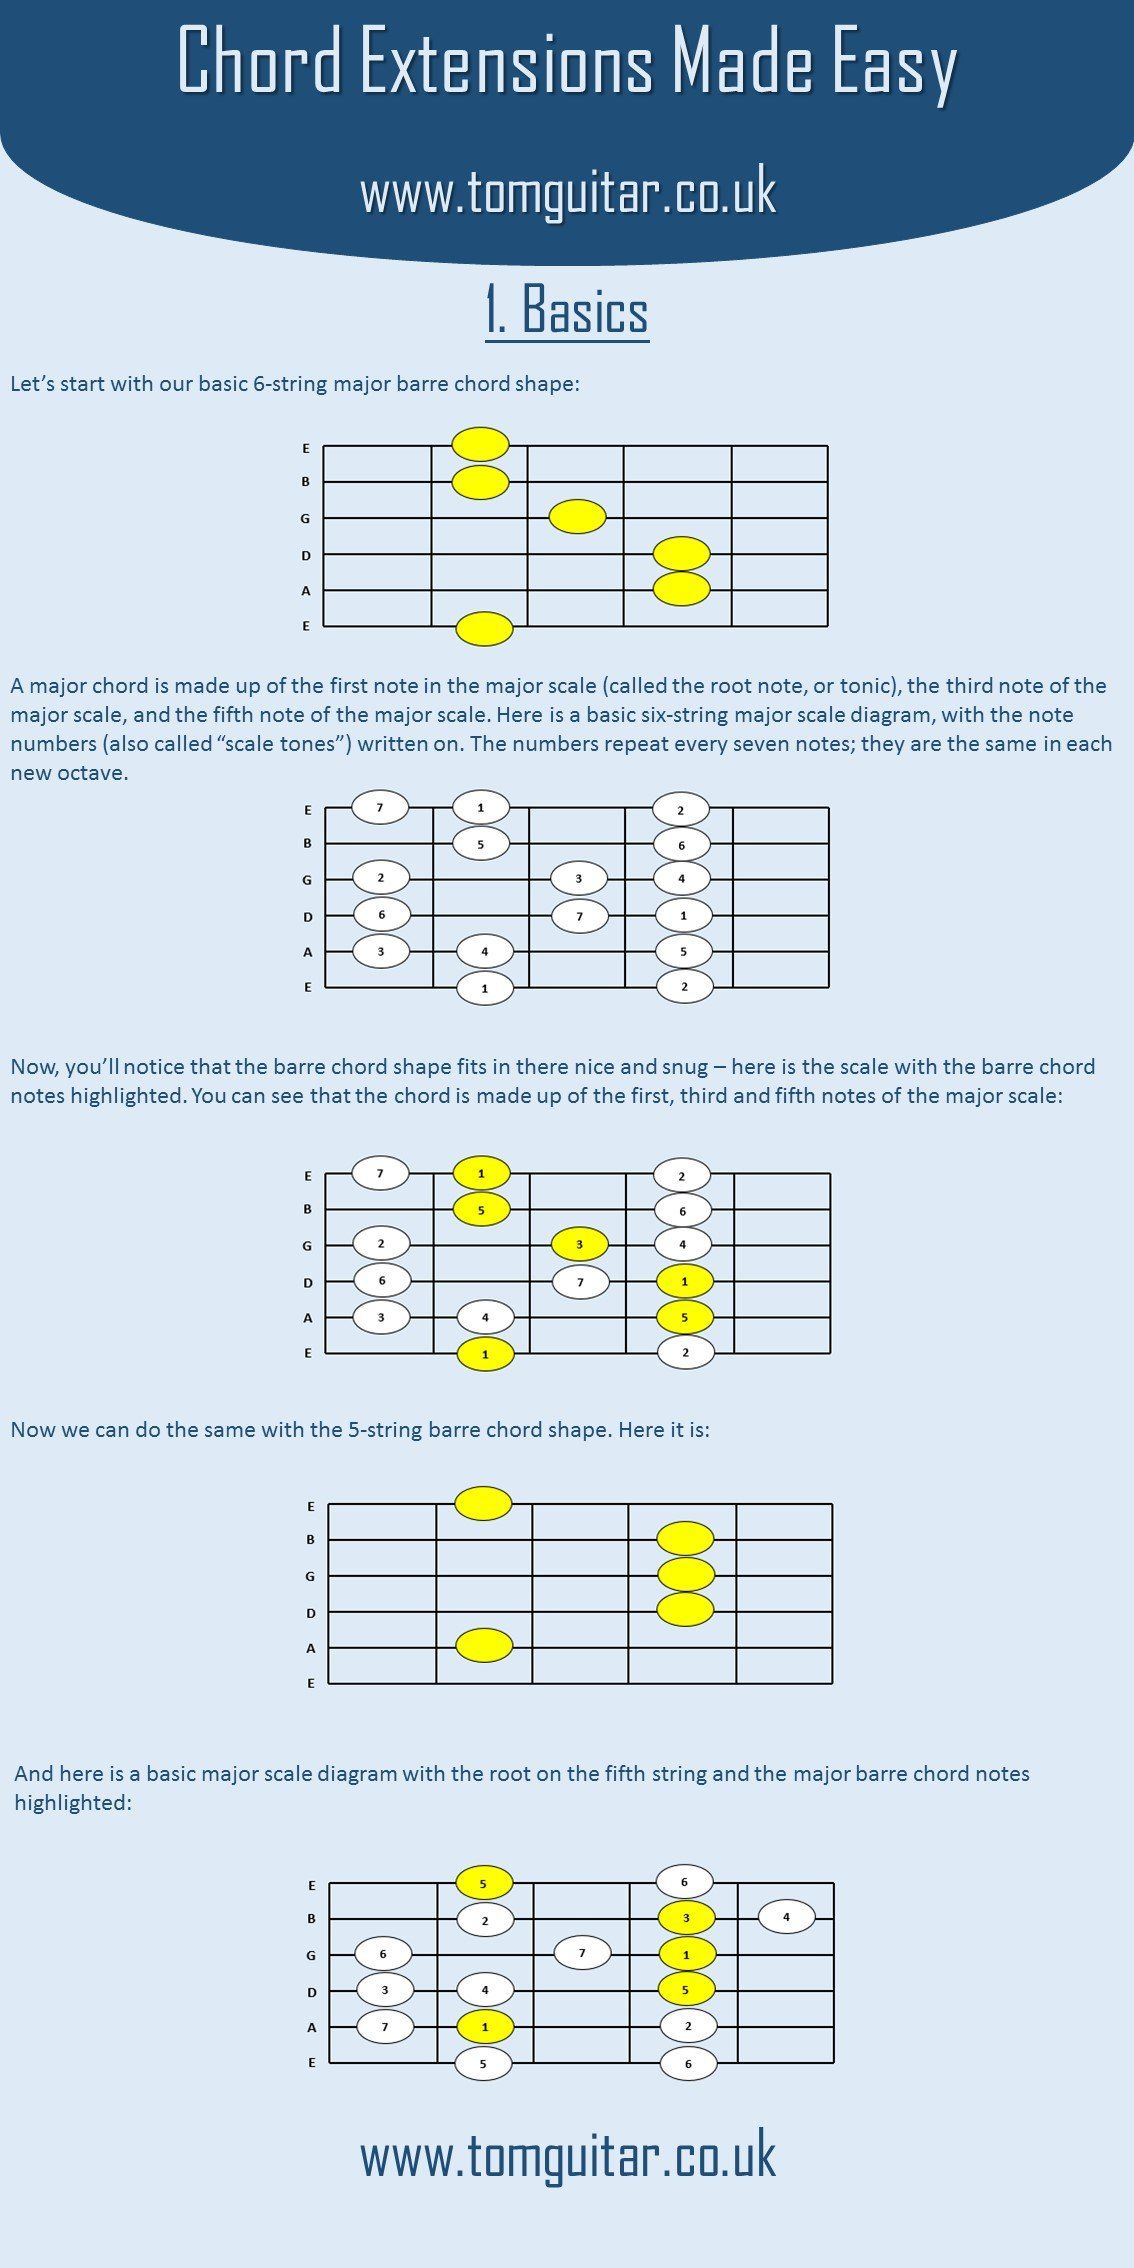 Chord Extensions Made Easy - Basics